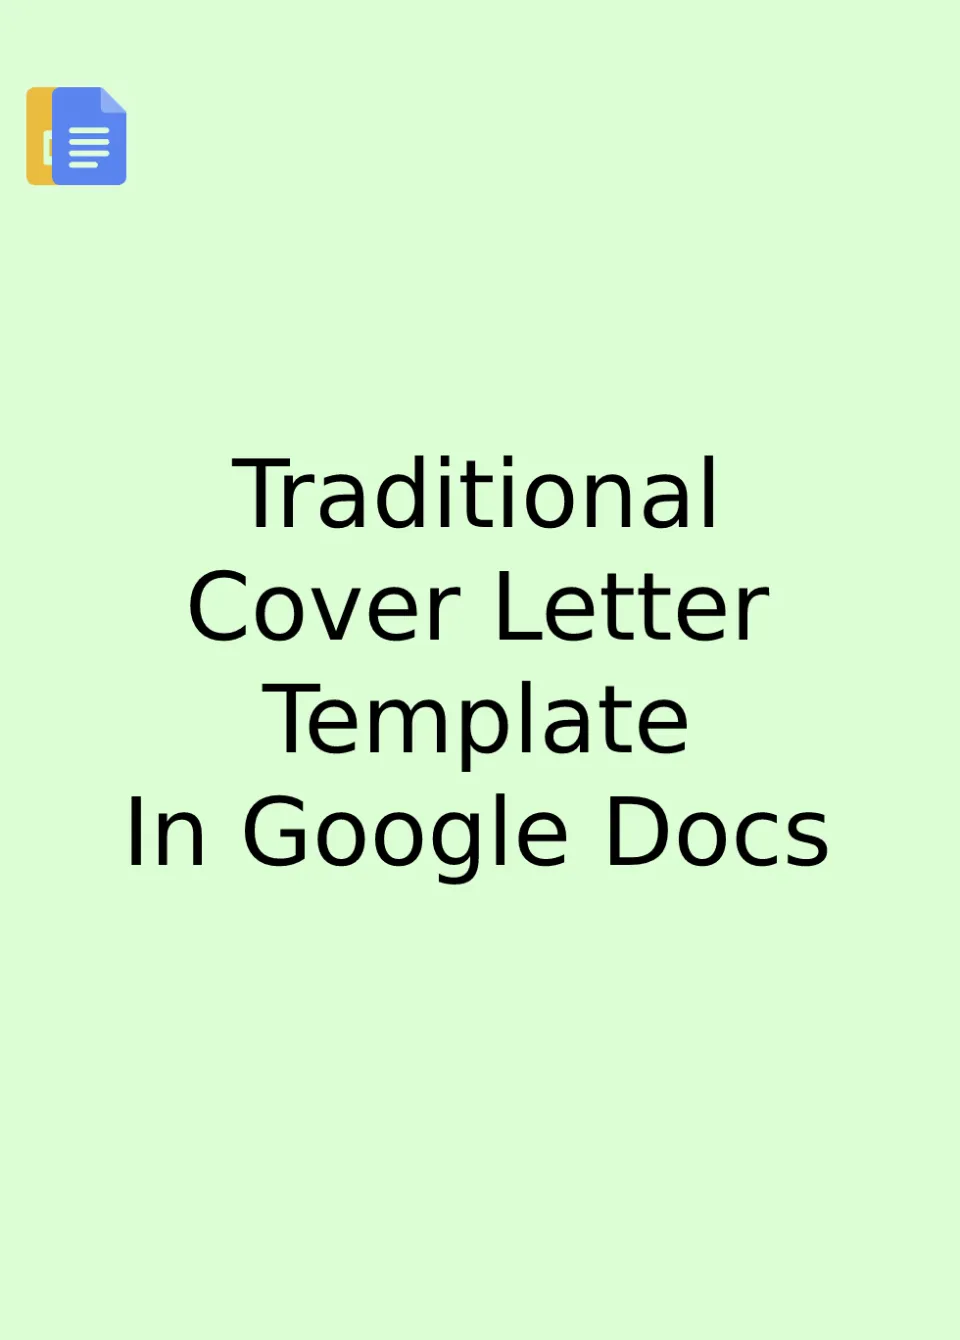 Traditional Cover Letter Template Google Docs